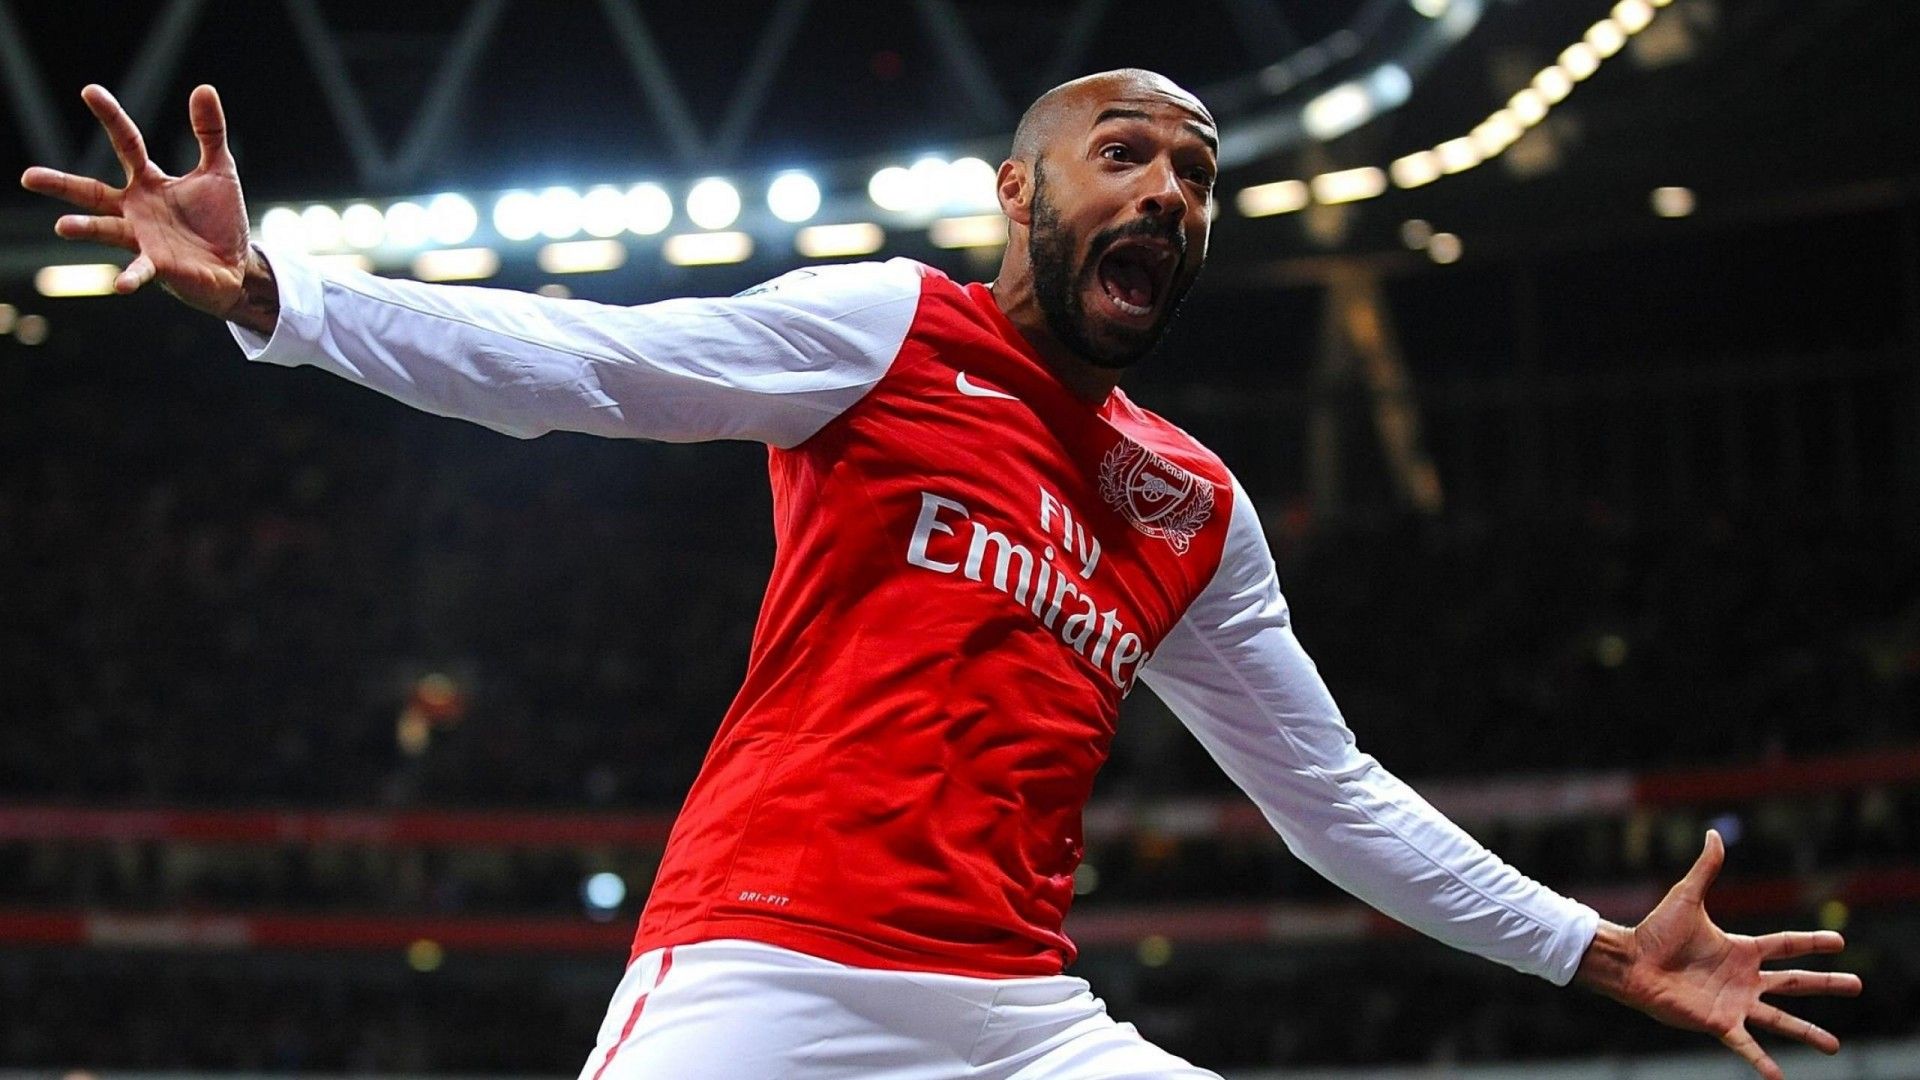 Thierry Henry Arsenal Arsenal Thierry Henry Legends id 182676